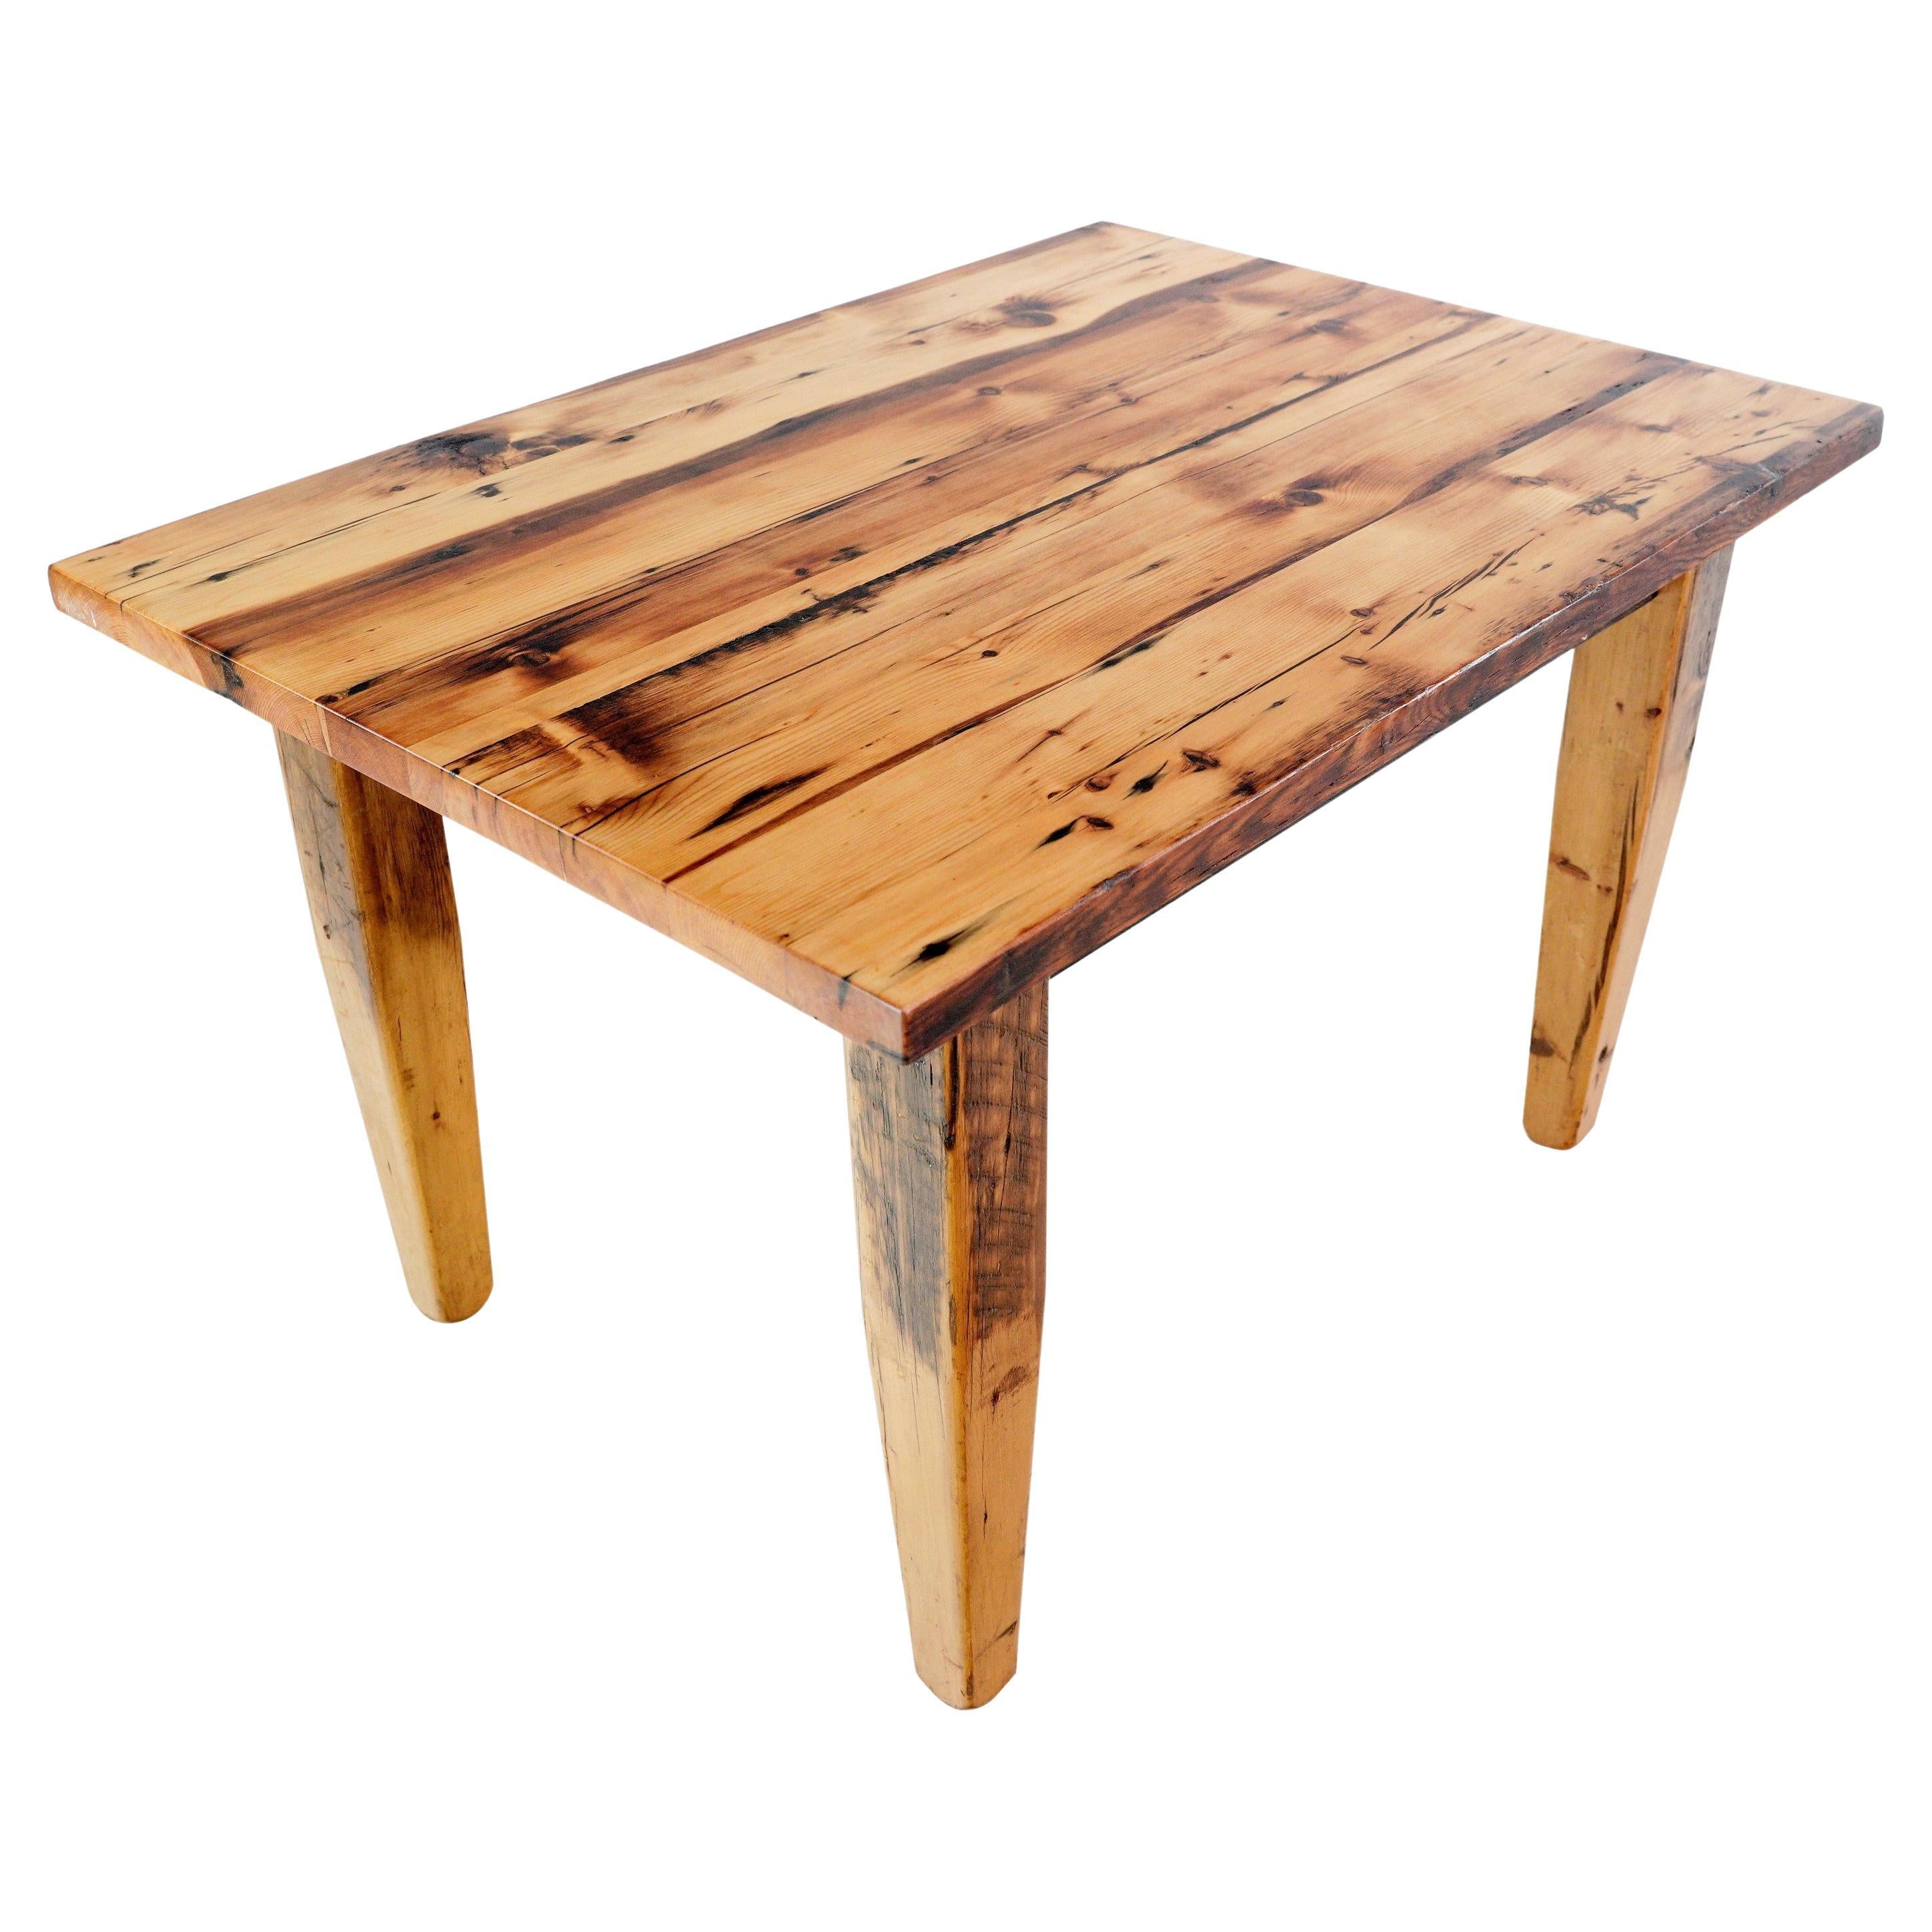 4 ft Pine Tapered Legs Dining Room Harvest Farm Table For Sale